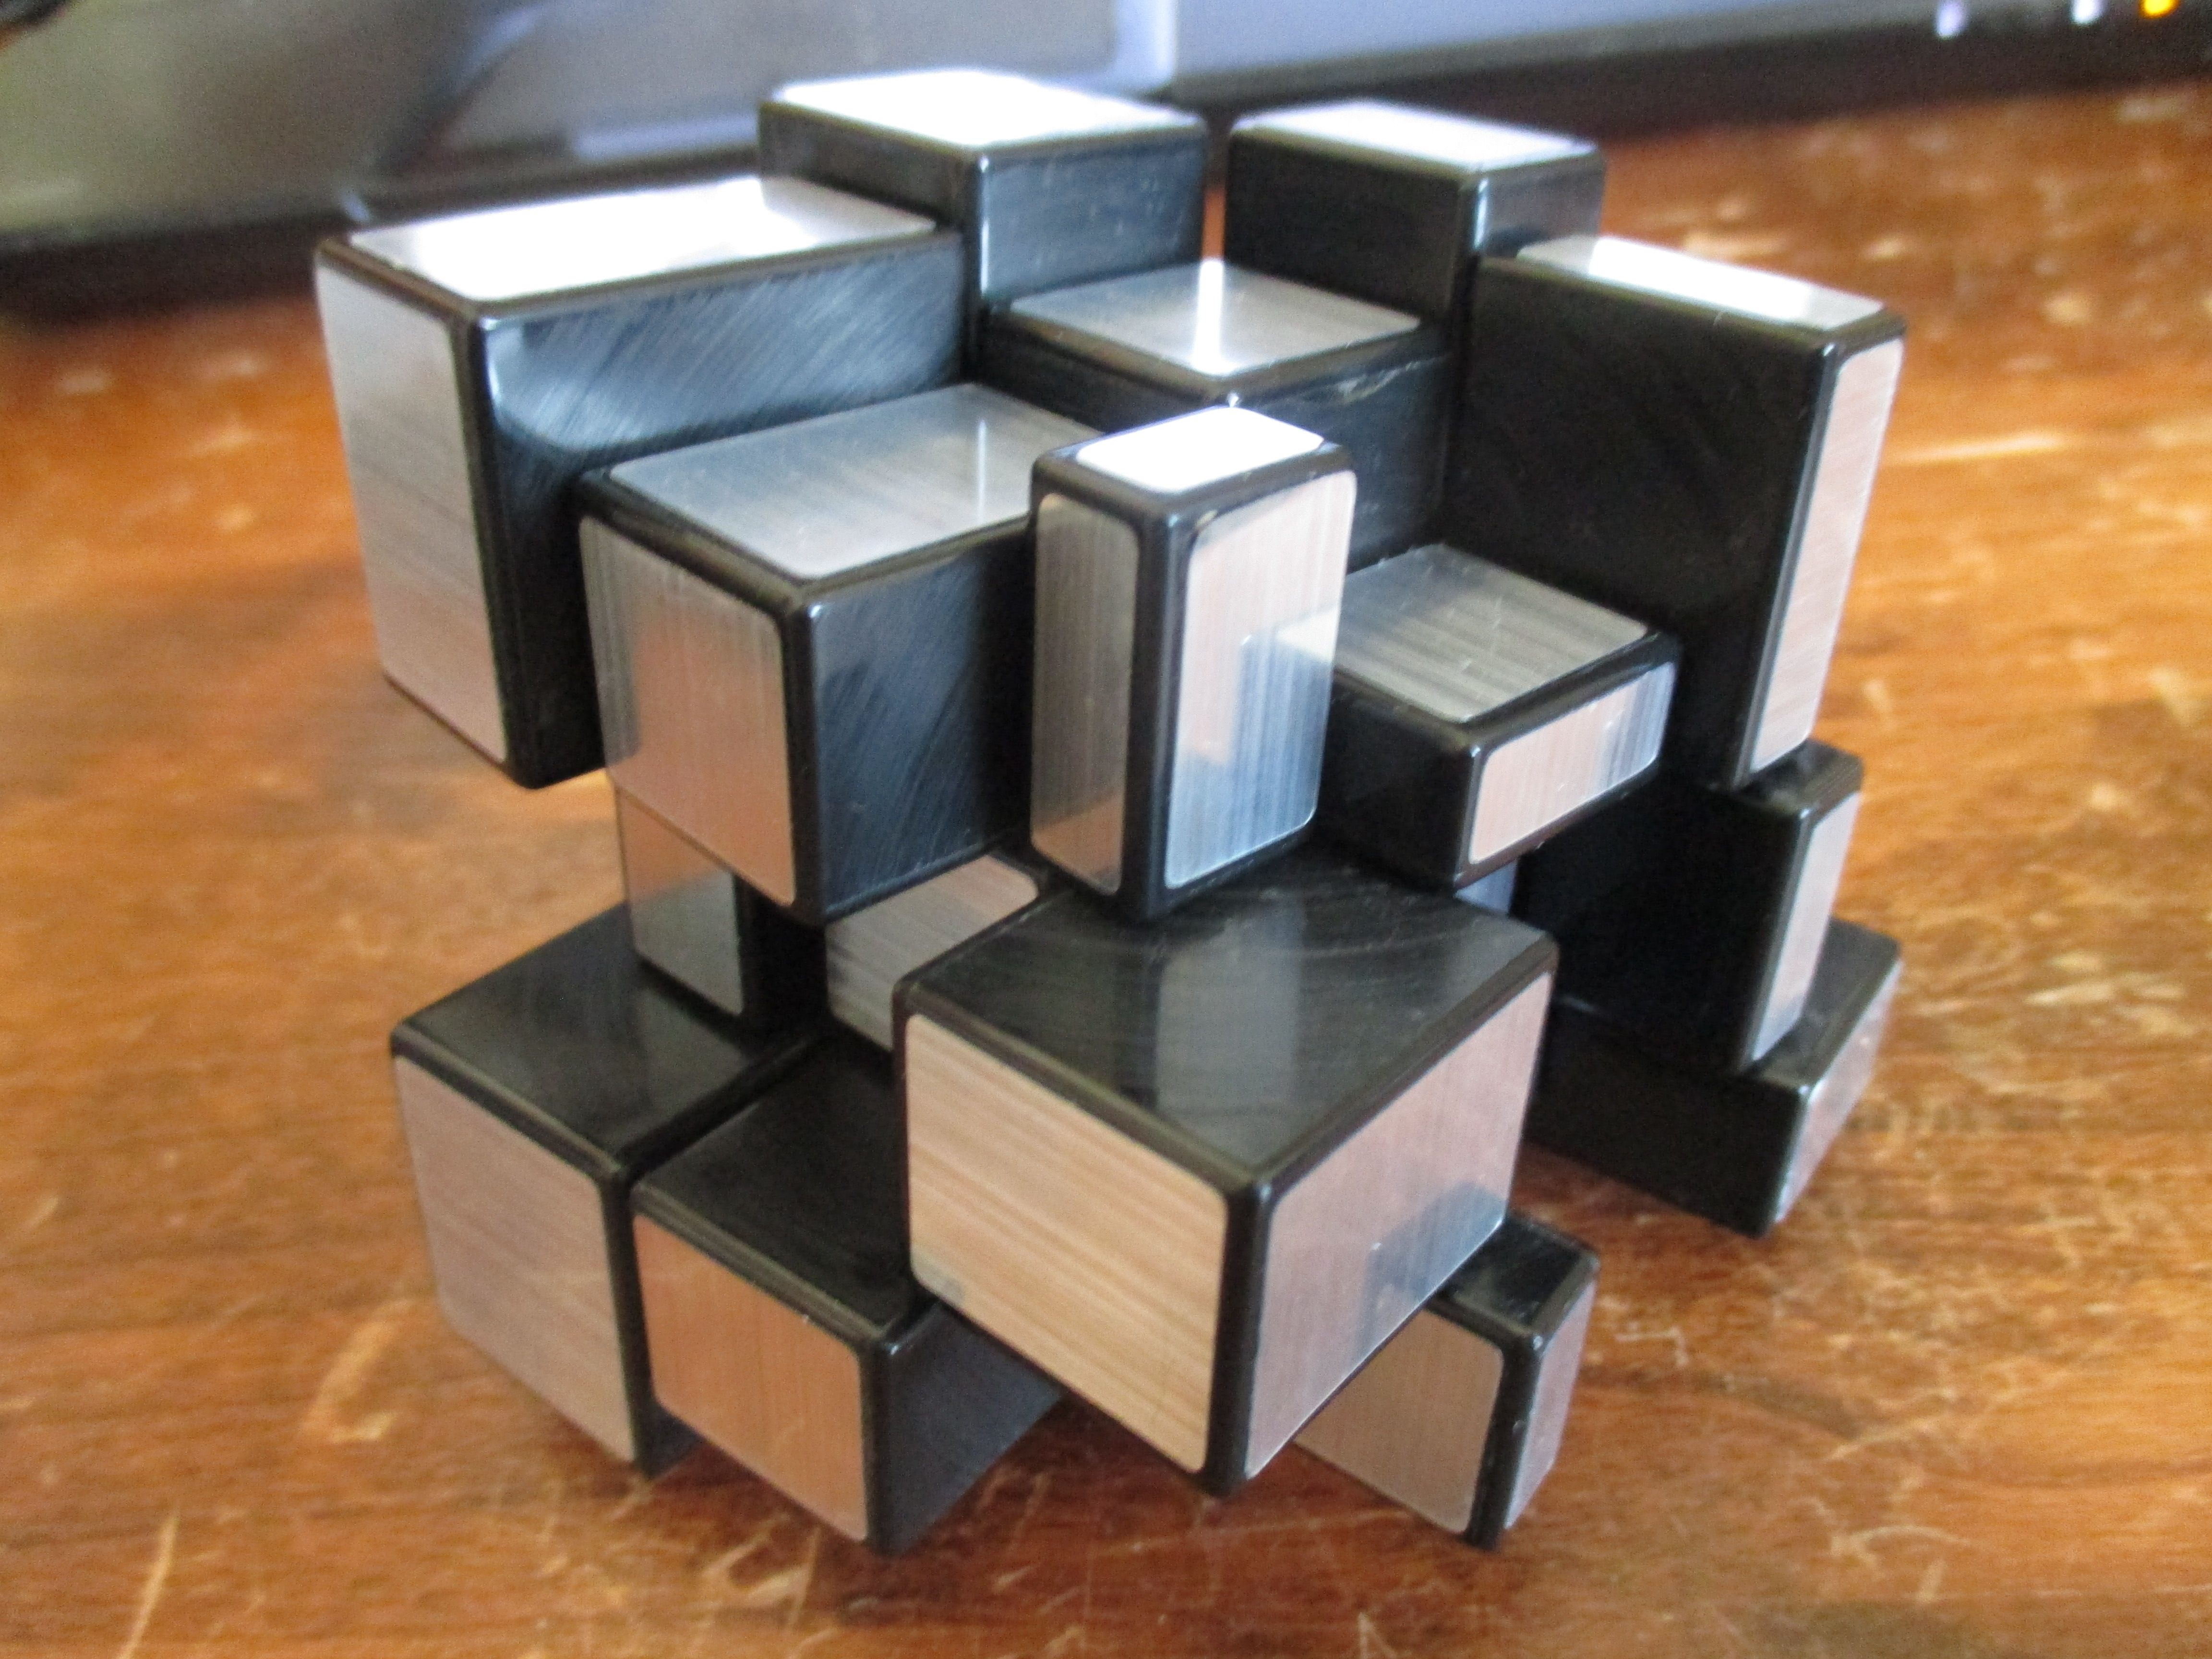 How To Solve The Mirror Cube, Mirror Cube Solving Guide